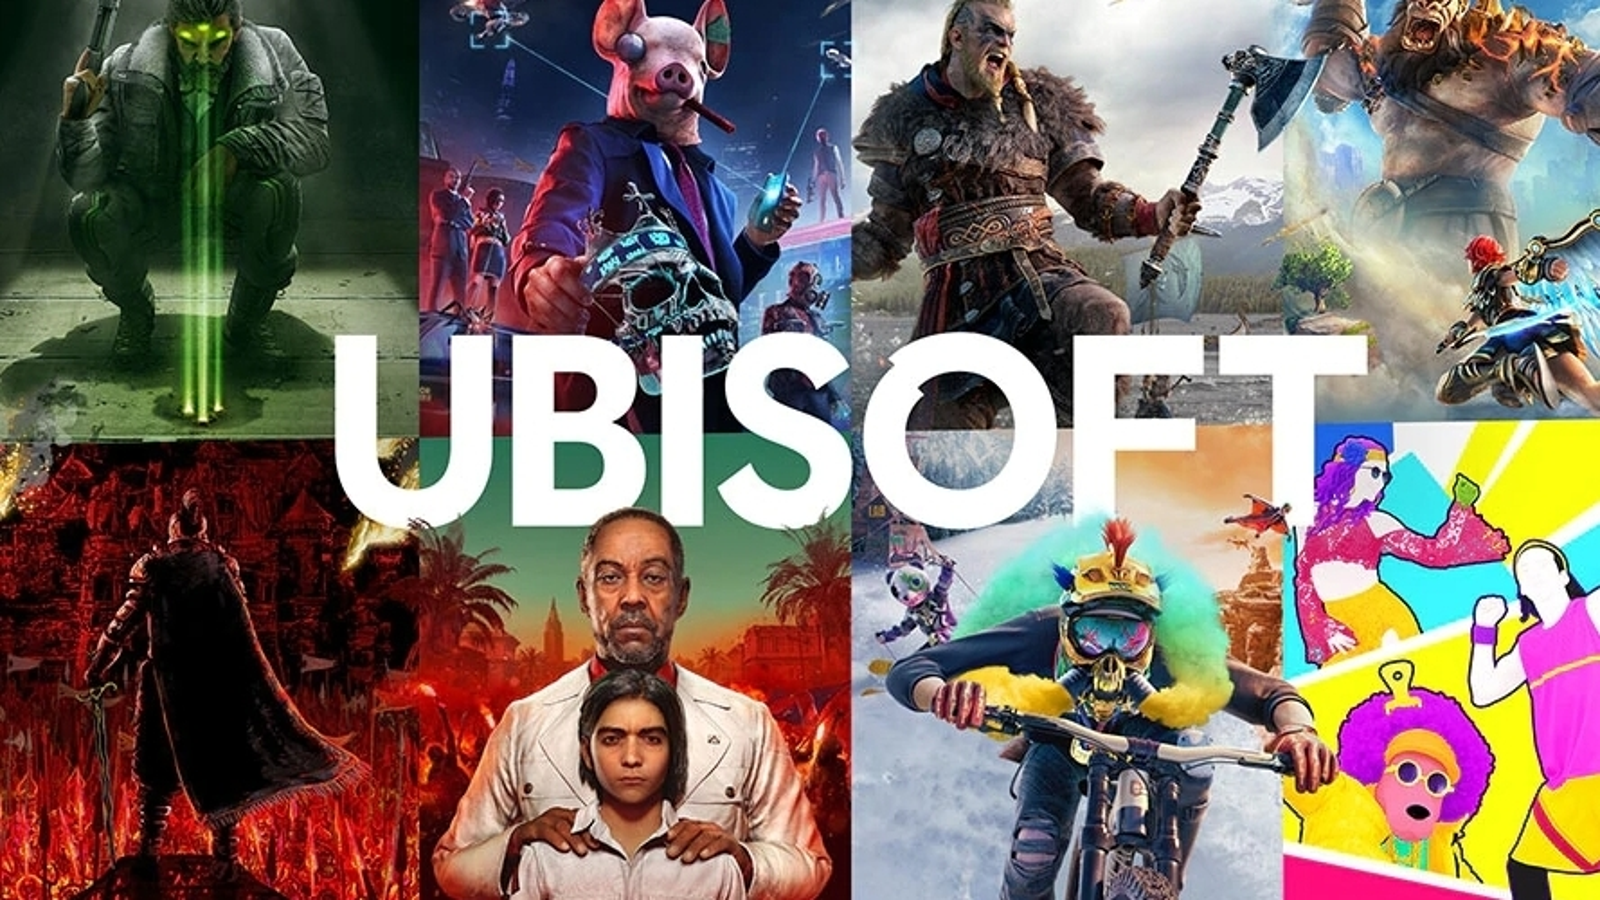 Ubisoft Forward 2022 live coverage - All the news as it happens